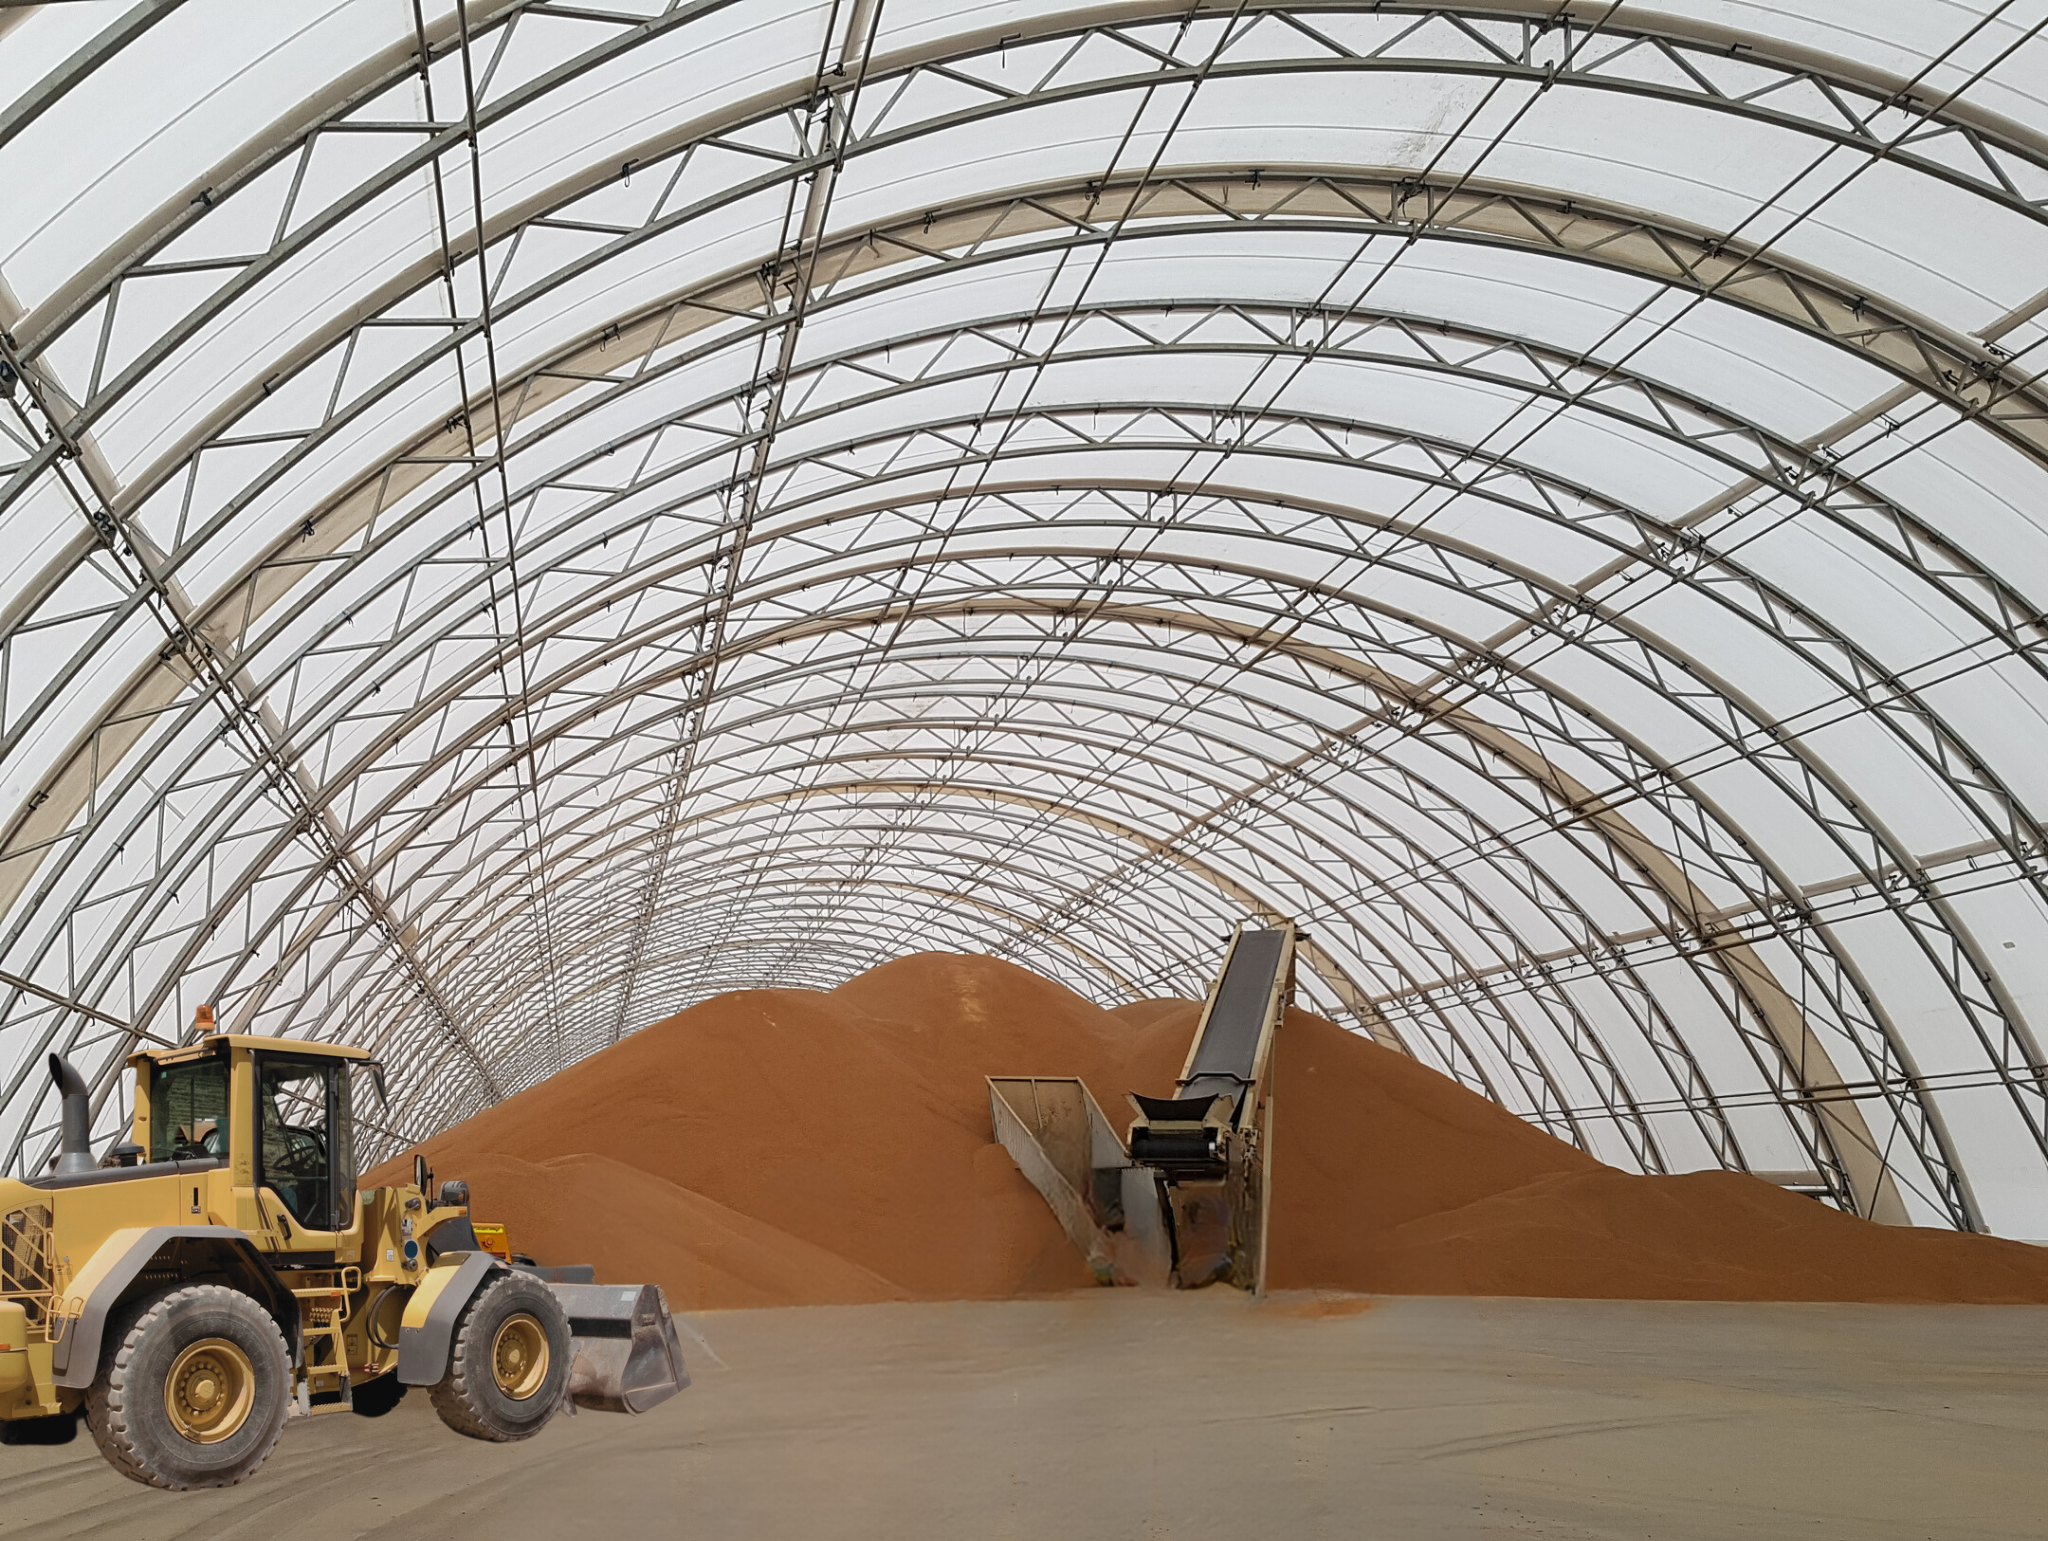 fabric shelter used for large scale storage of dirt